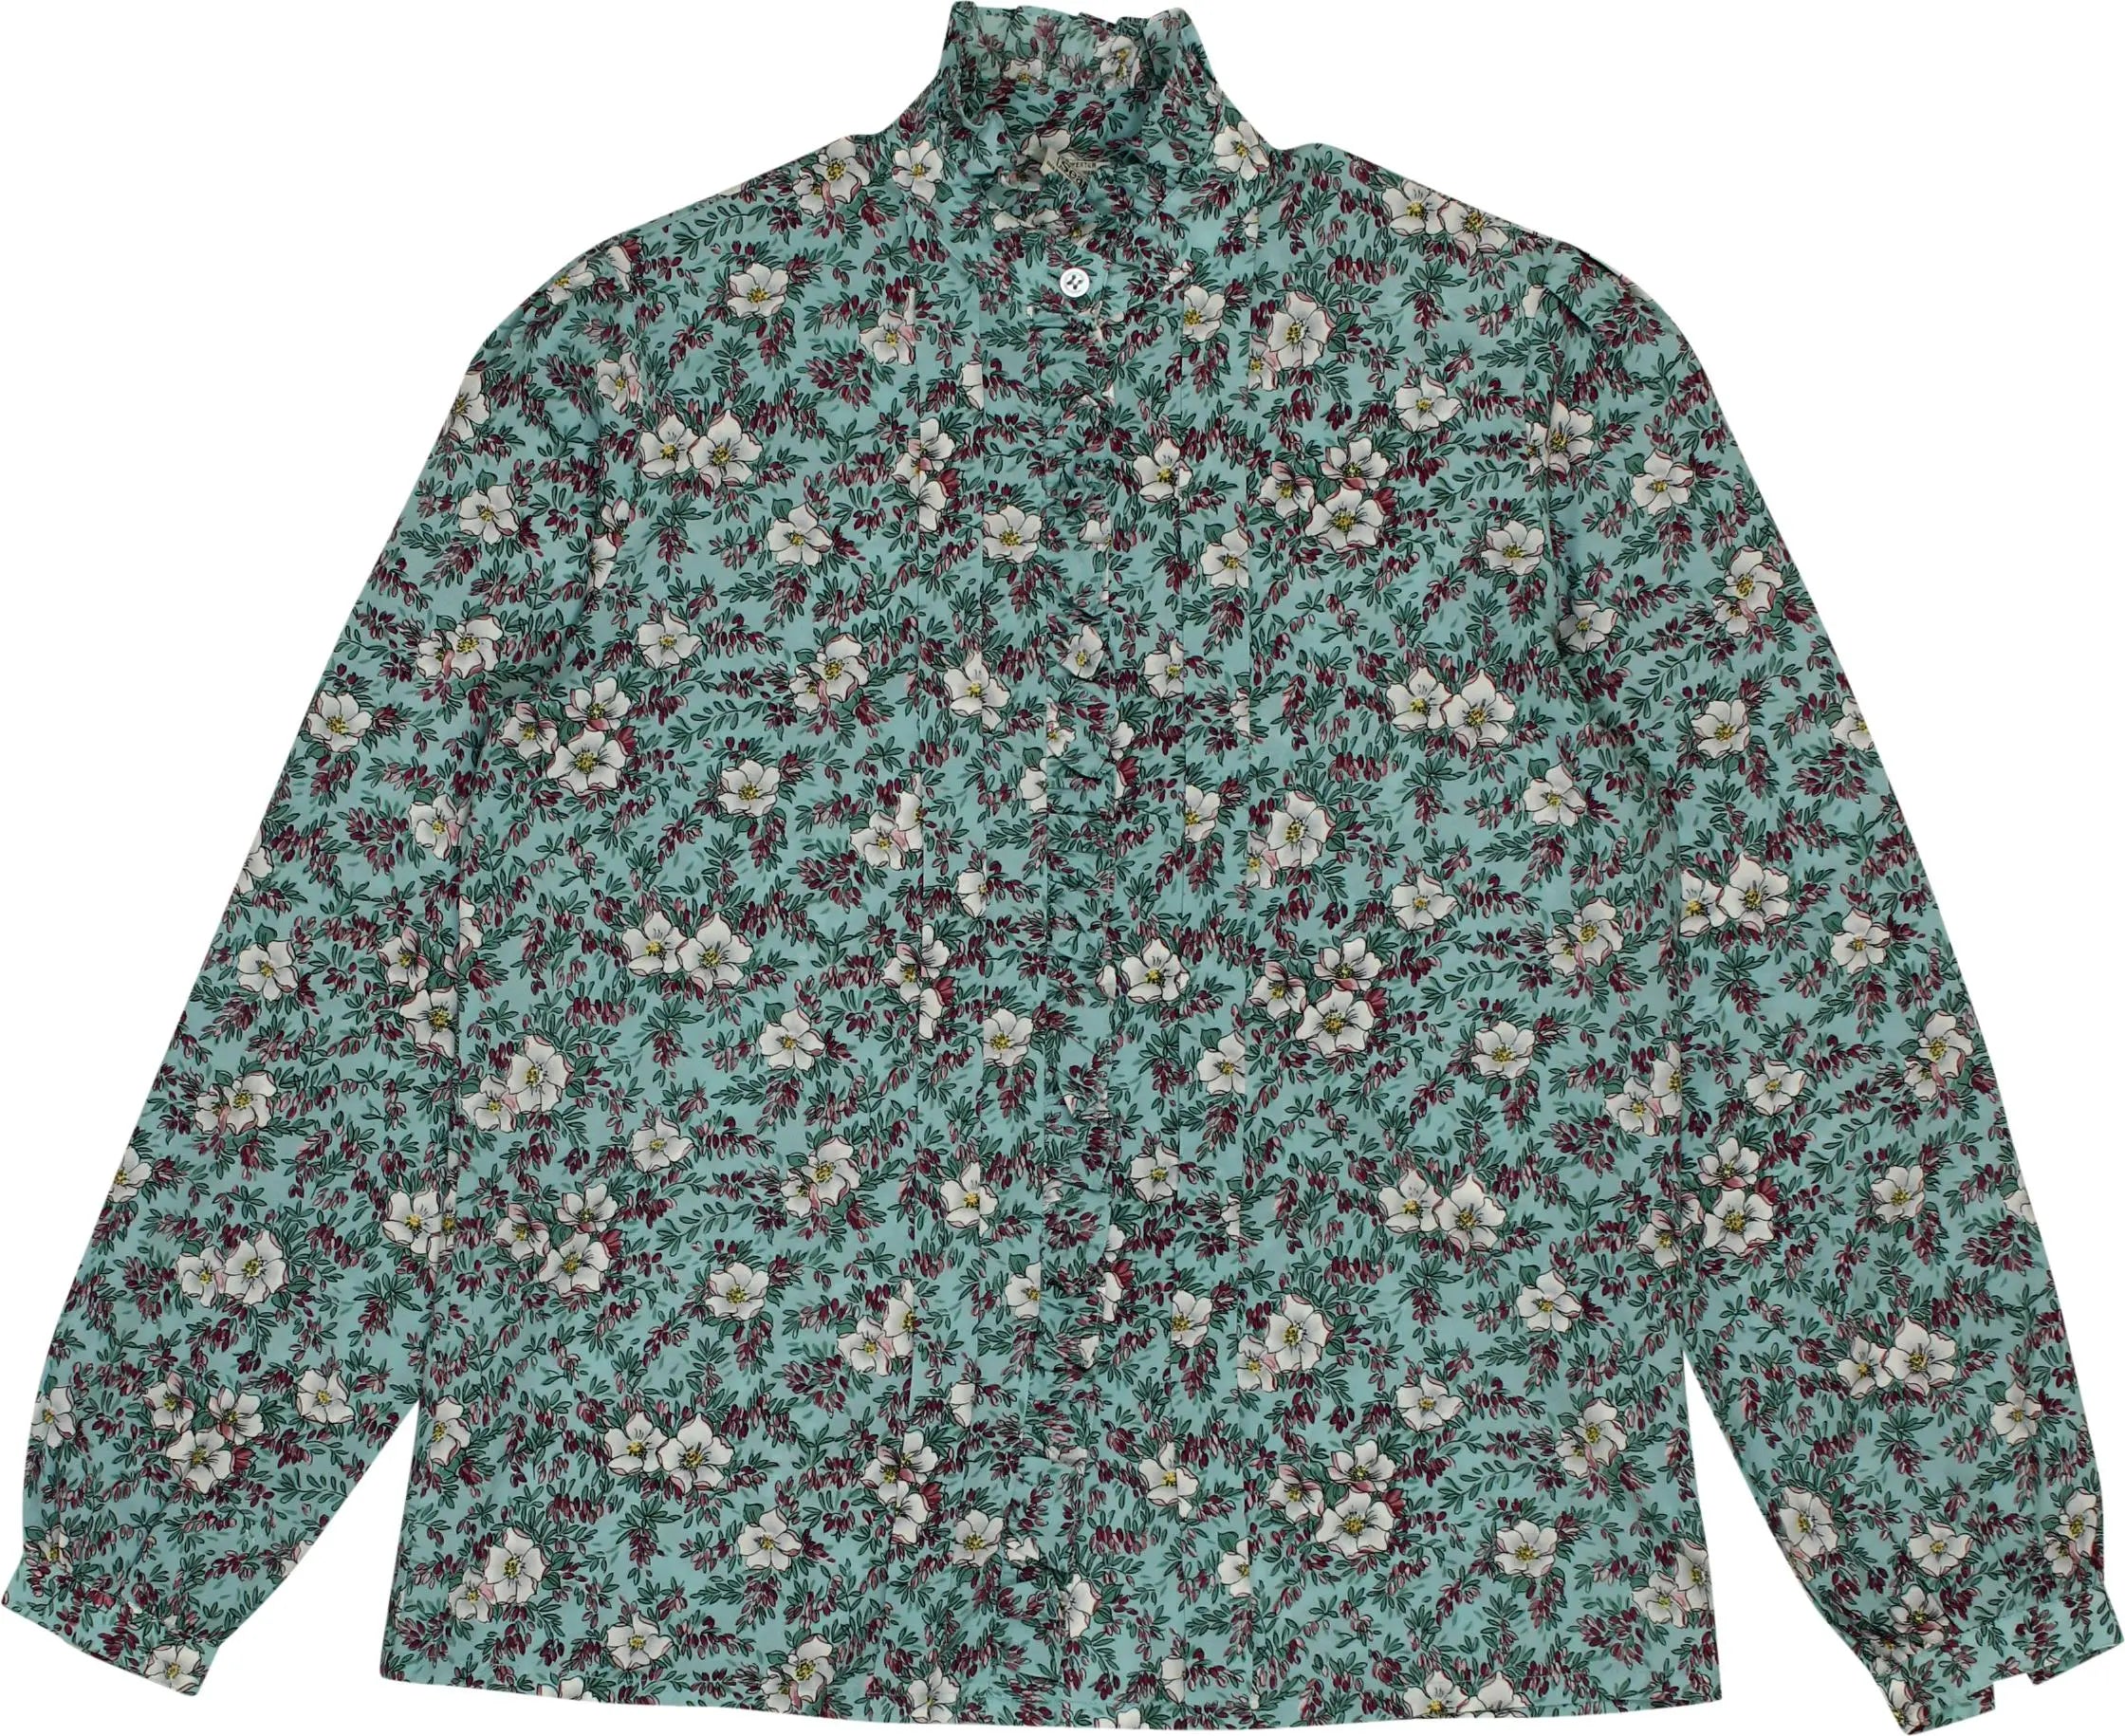 Sears - 70s/80s Floral Blouse- ThriftTale.com - Vintage and second handclothing